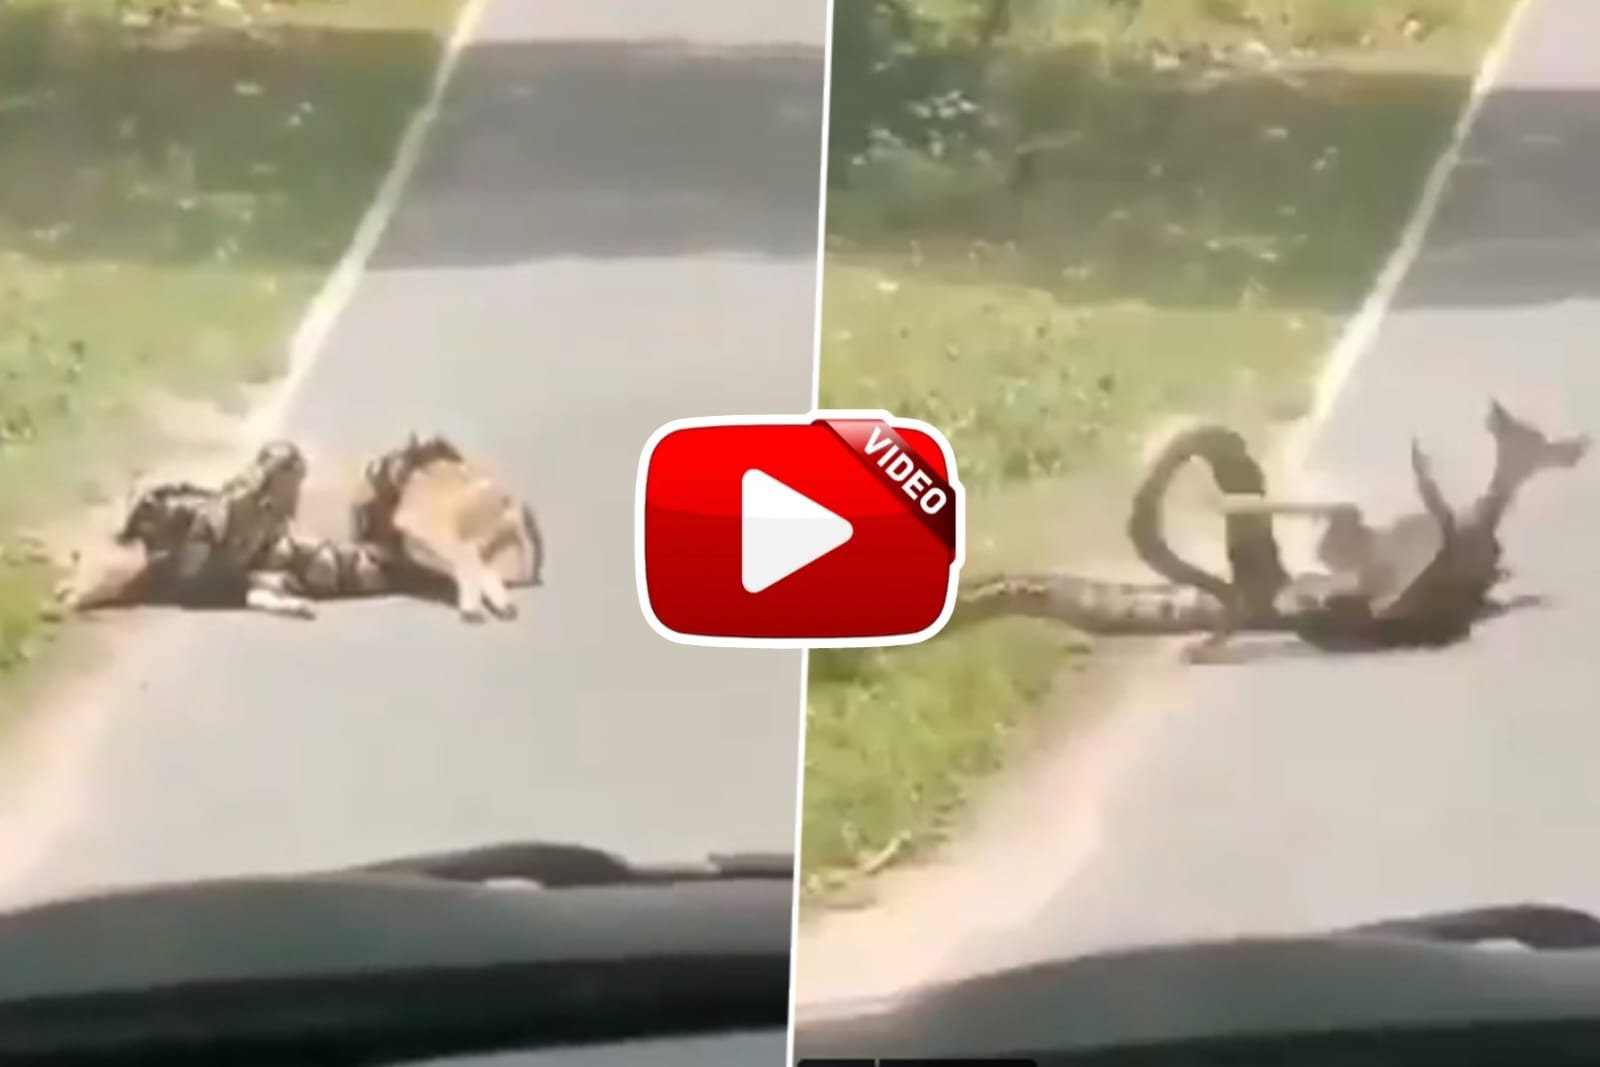 Video of Ajgar Aur Hiran seen fighting badly in the middle of the road goes viral